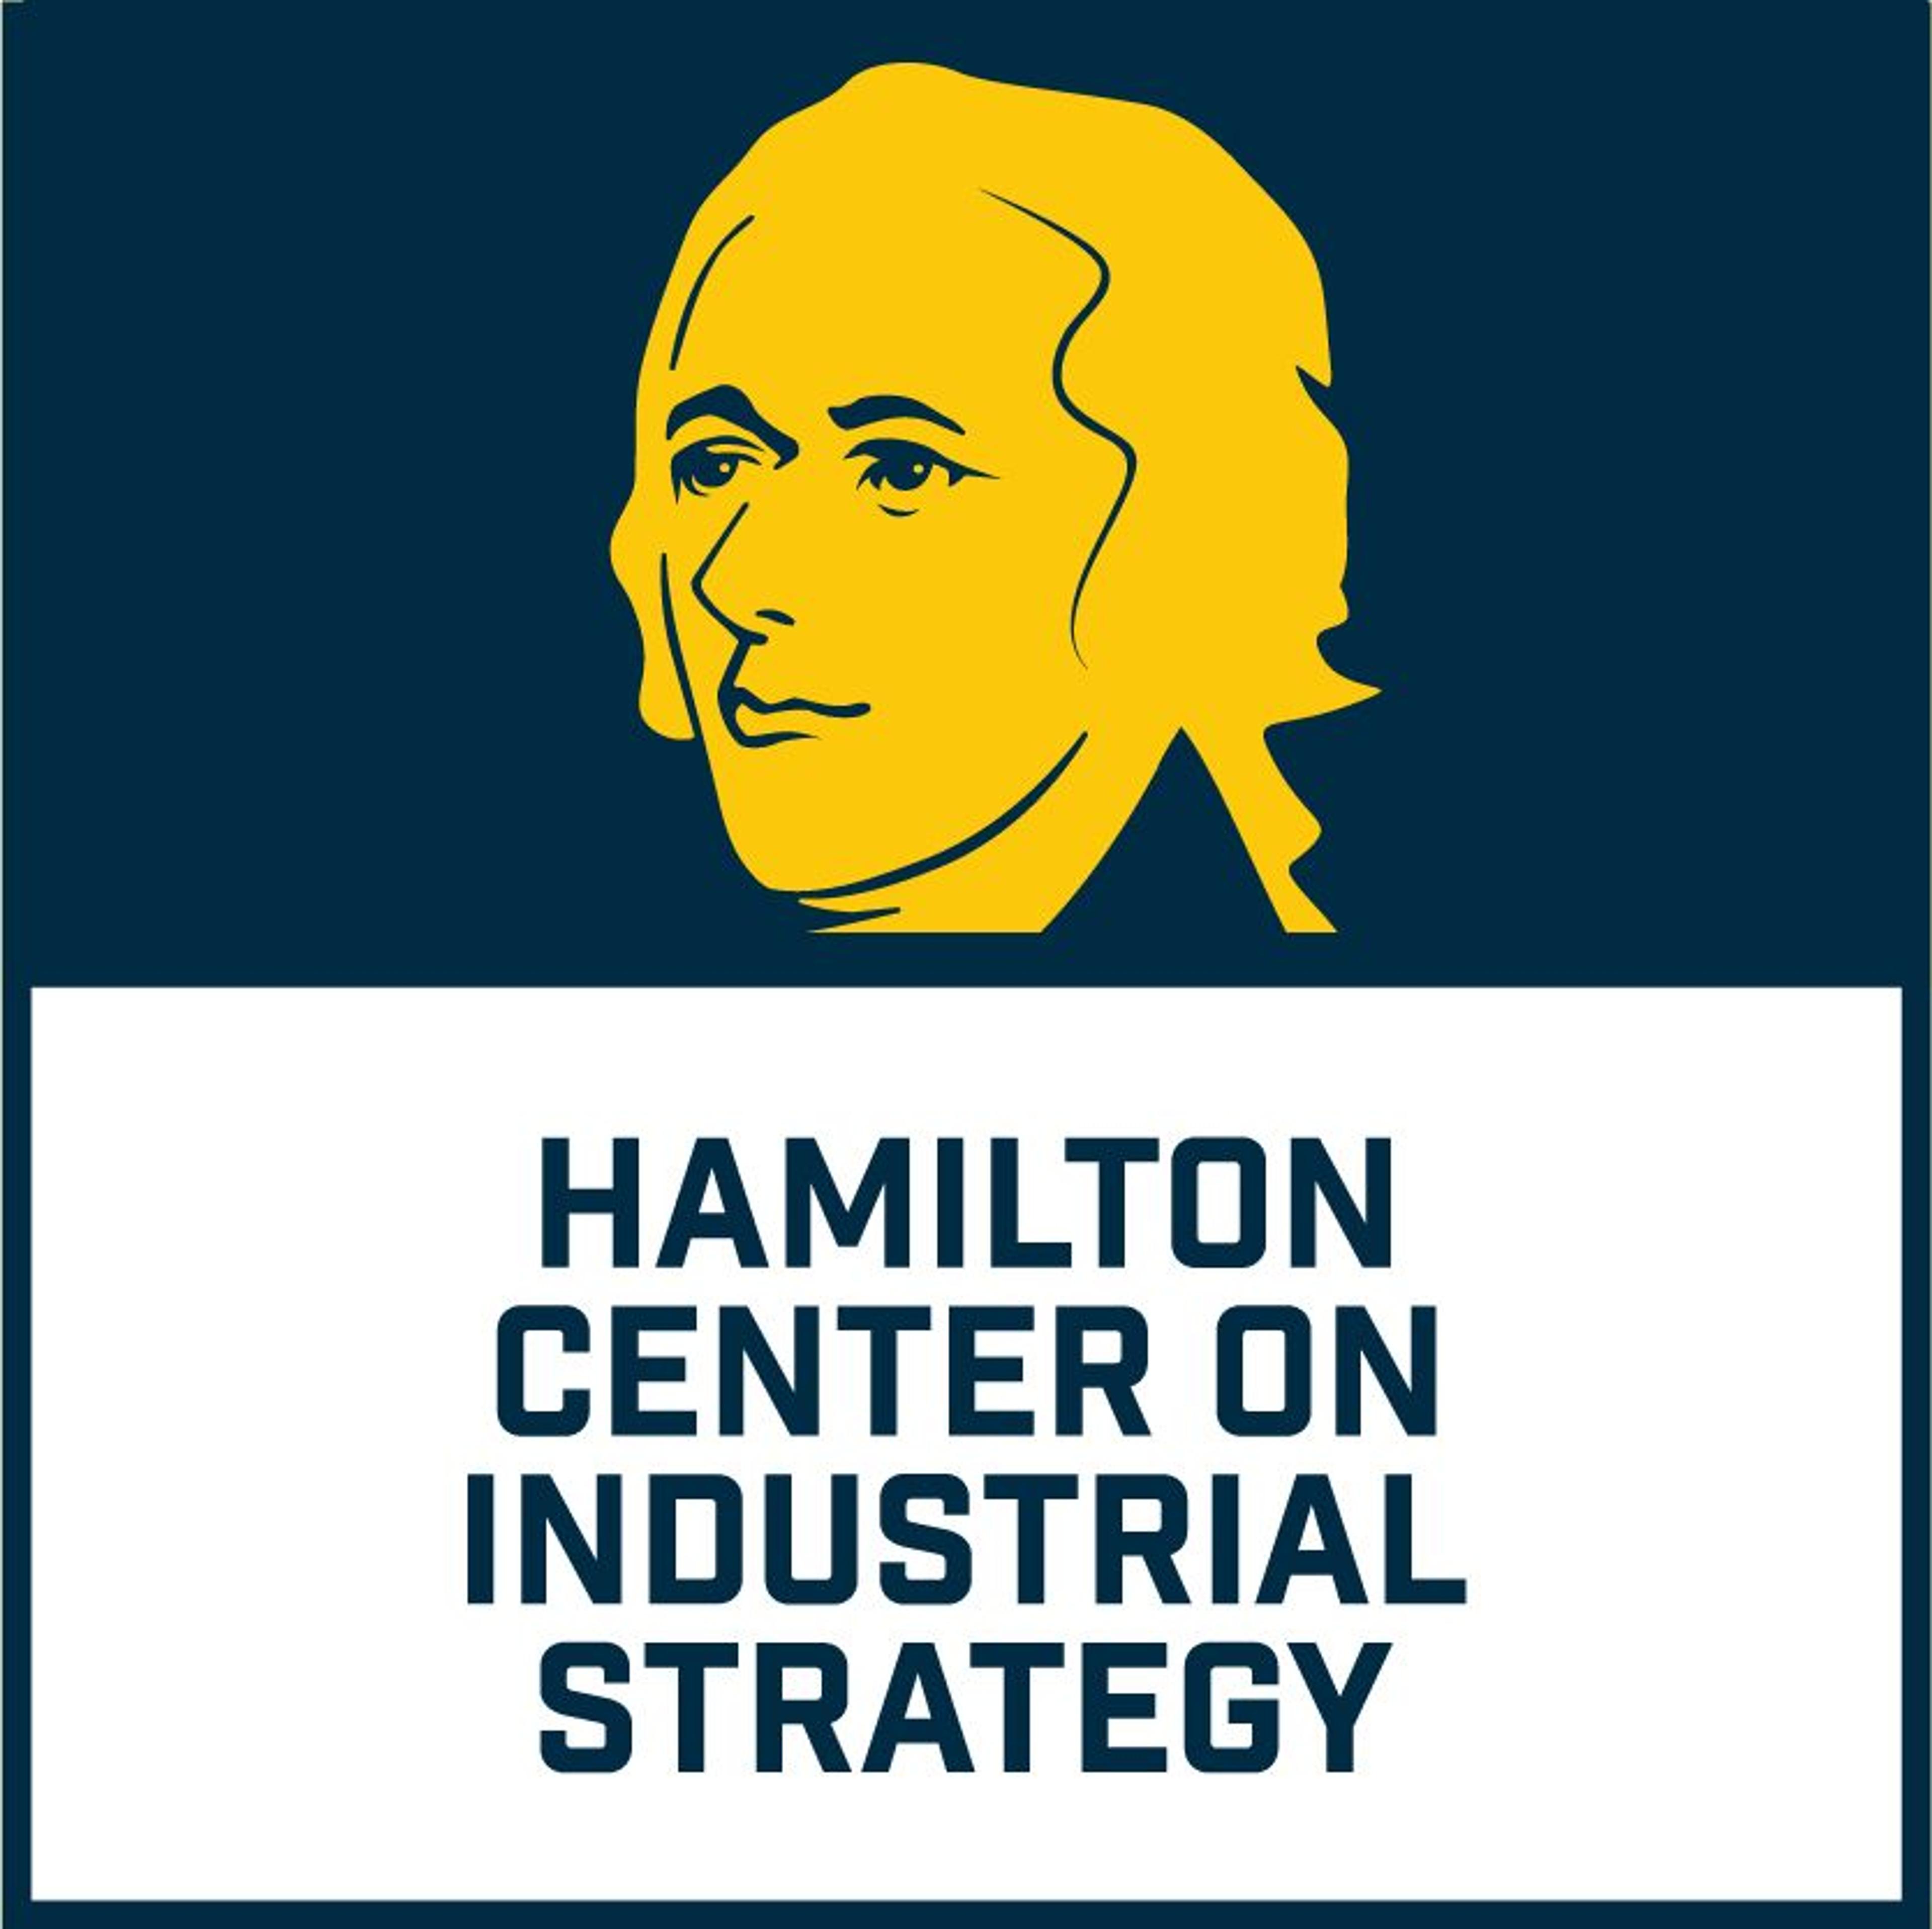 The Hamilton Index of Advanced-Industry Performance: Data Visualization Tool